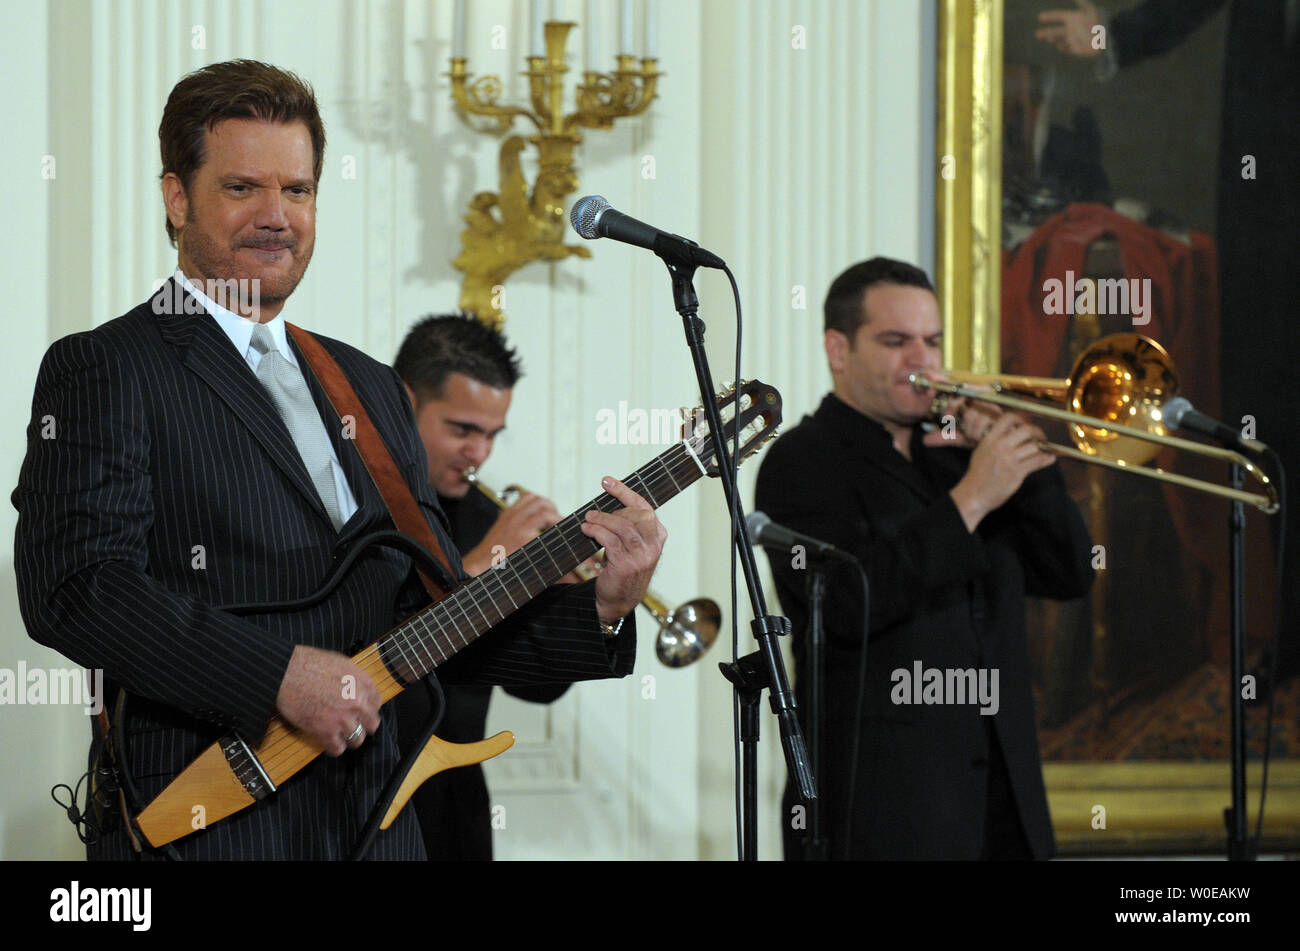 Willy Chirino performs after U.S. President George W. Bush called for more freedom and democracy in Cuba during a event to express solidarity with Cubans in the East Room of the White House on May 21, 2008.   (UPI Photo/Roger L. Wollenberg) Stock Photo